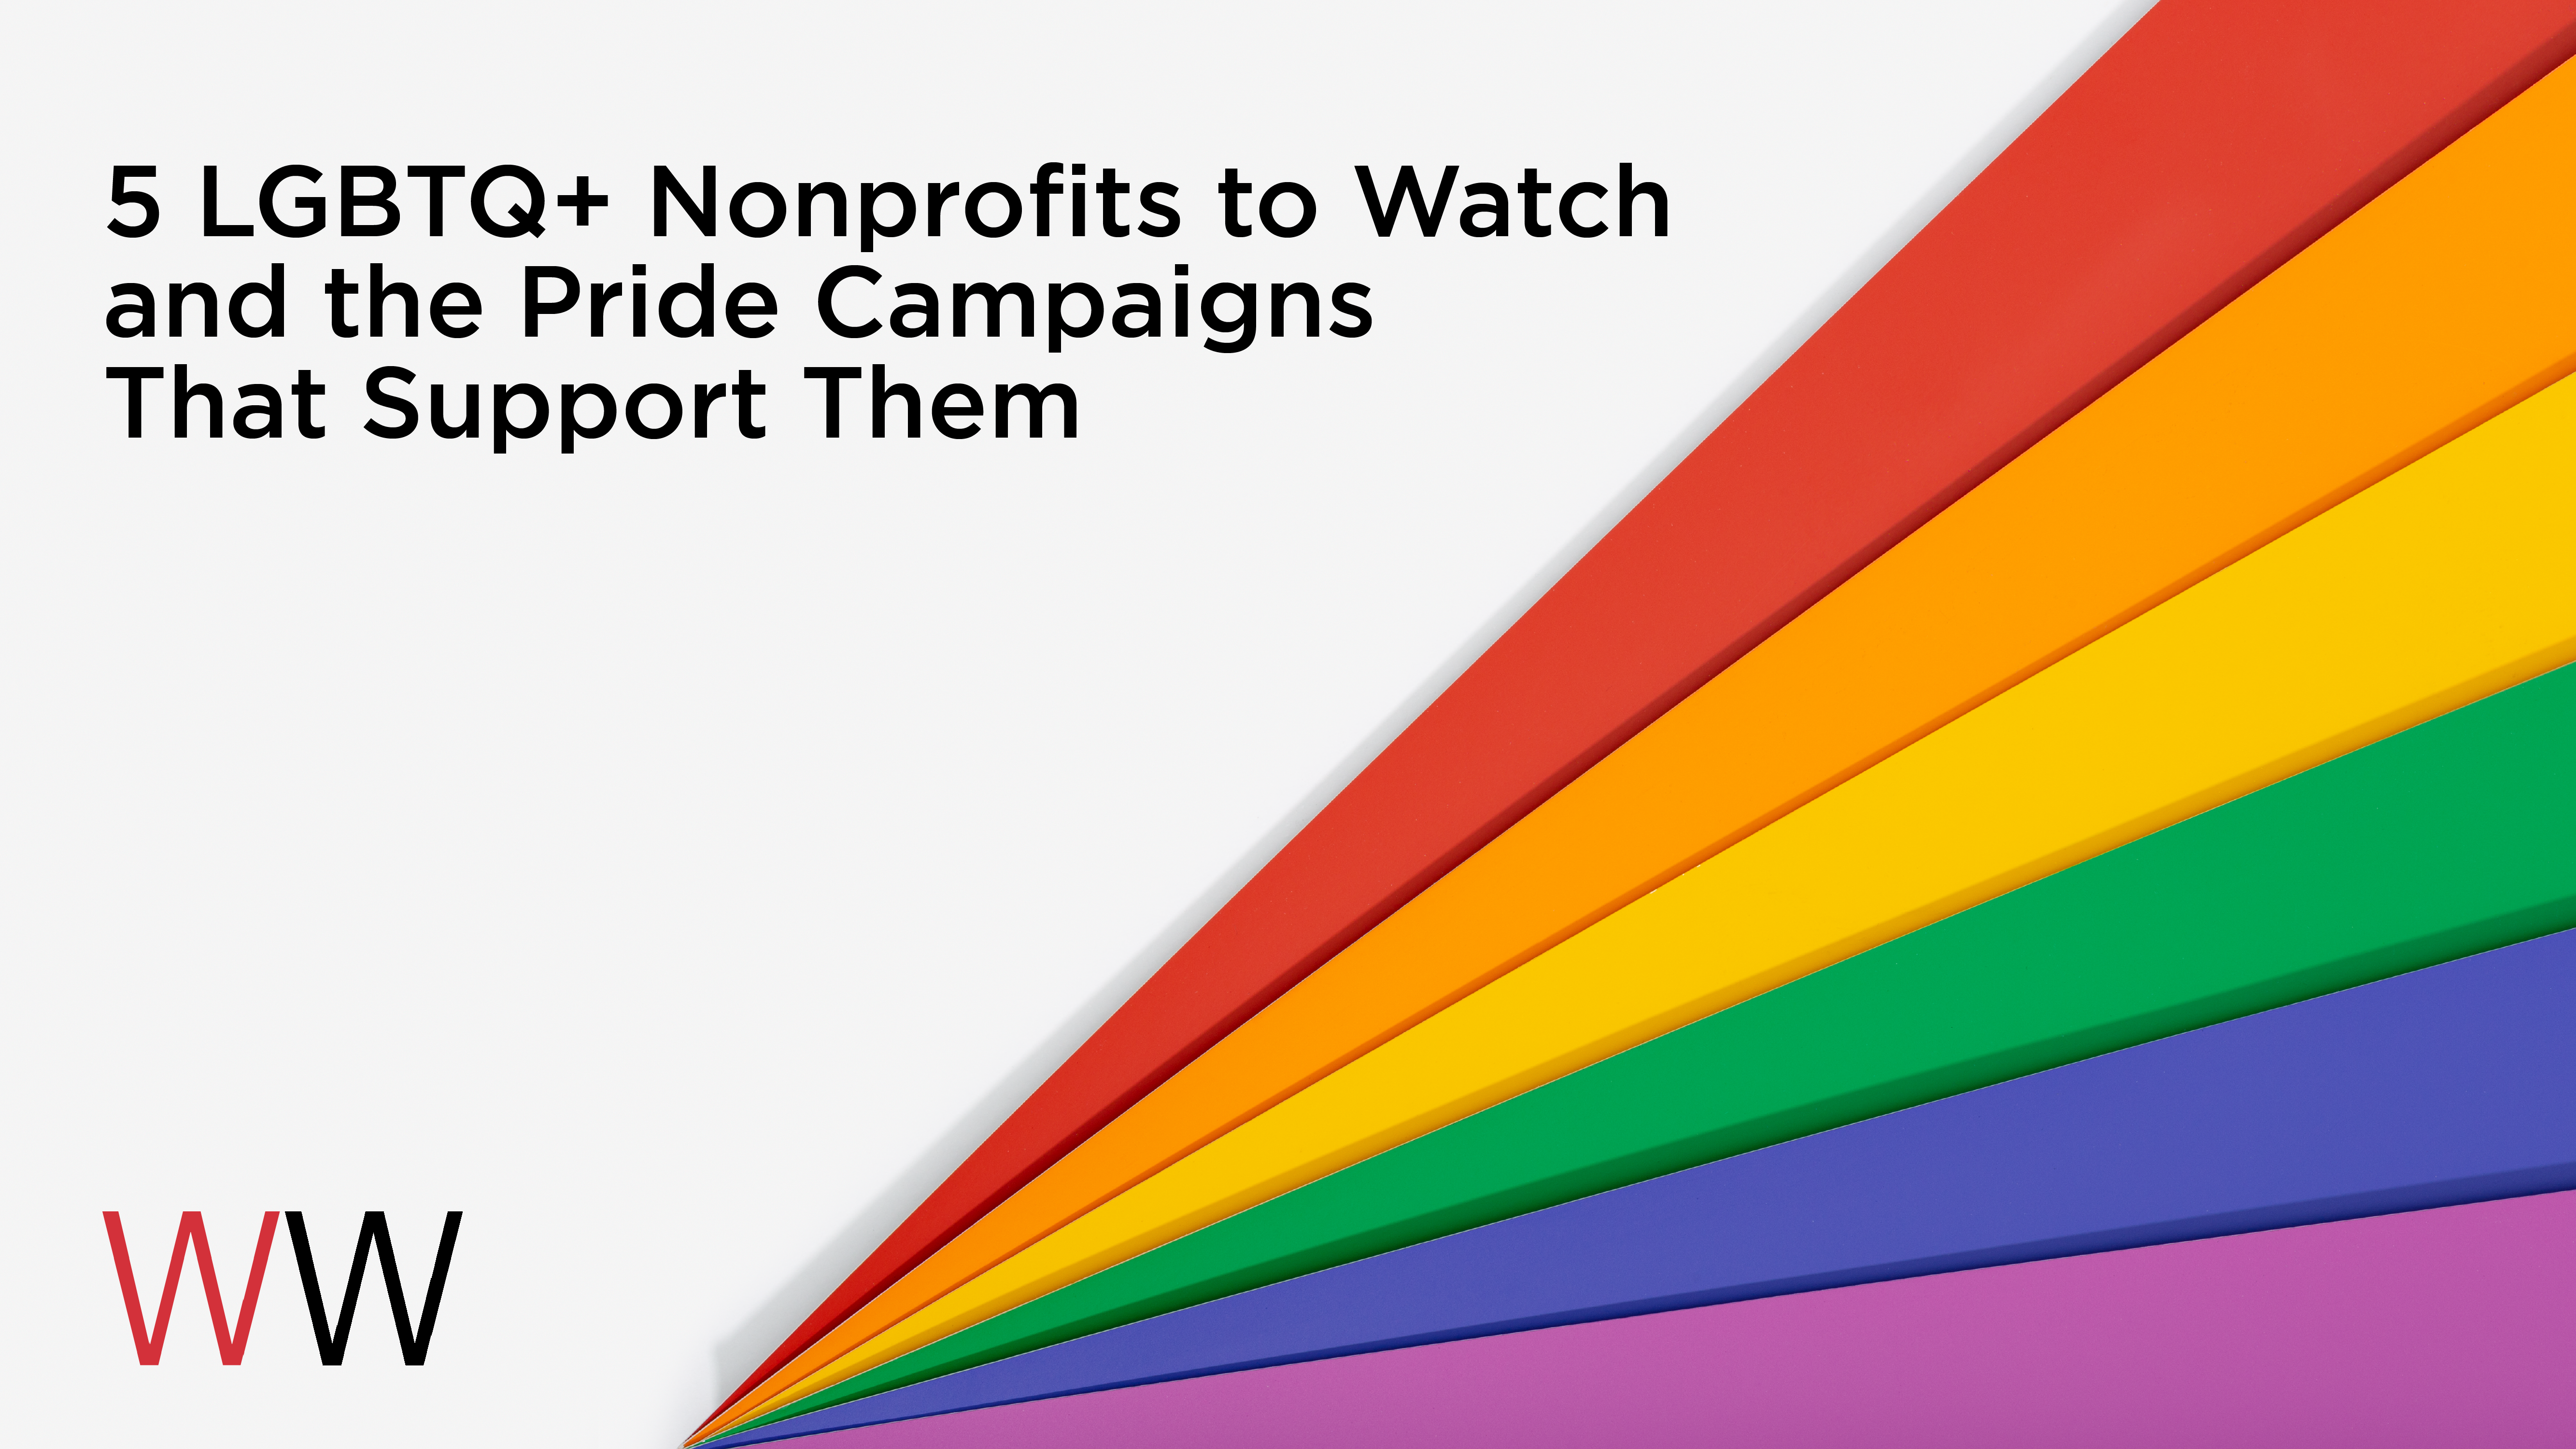 5 LGBTQ+ Nonprofits to Watch and the Pride Campaigns That Support Them